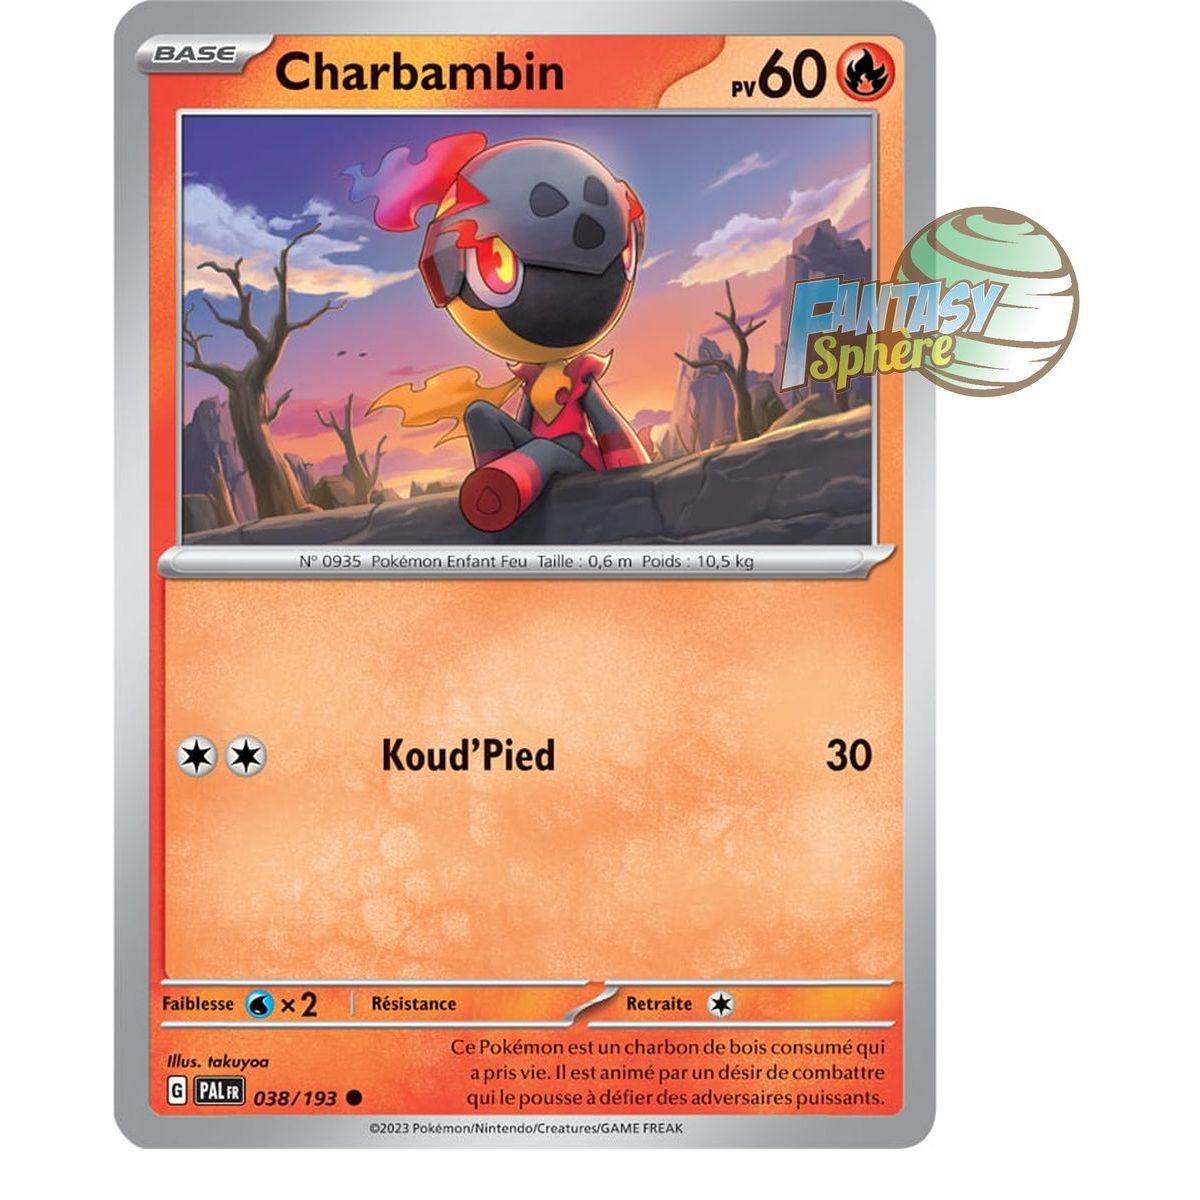 Item Charbambin - Municipality 38/193 - Scarlet and Violet Evolution in Paldea